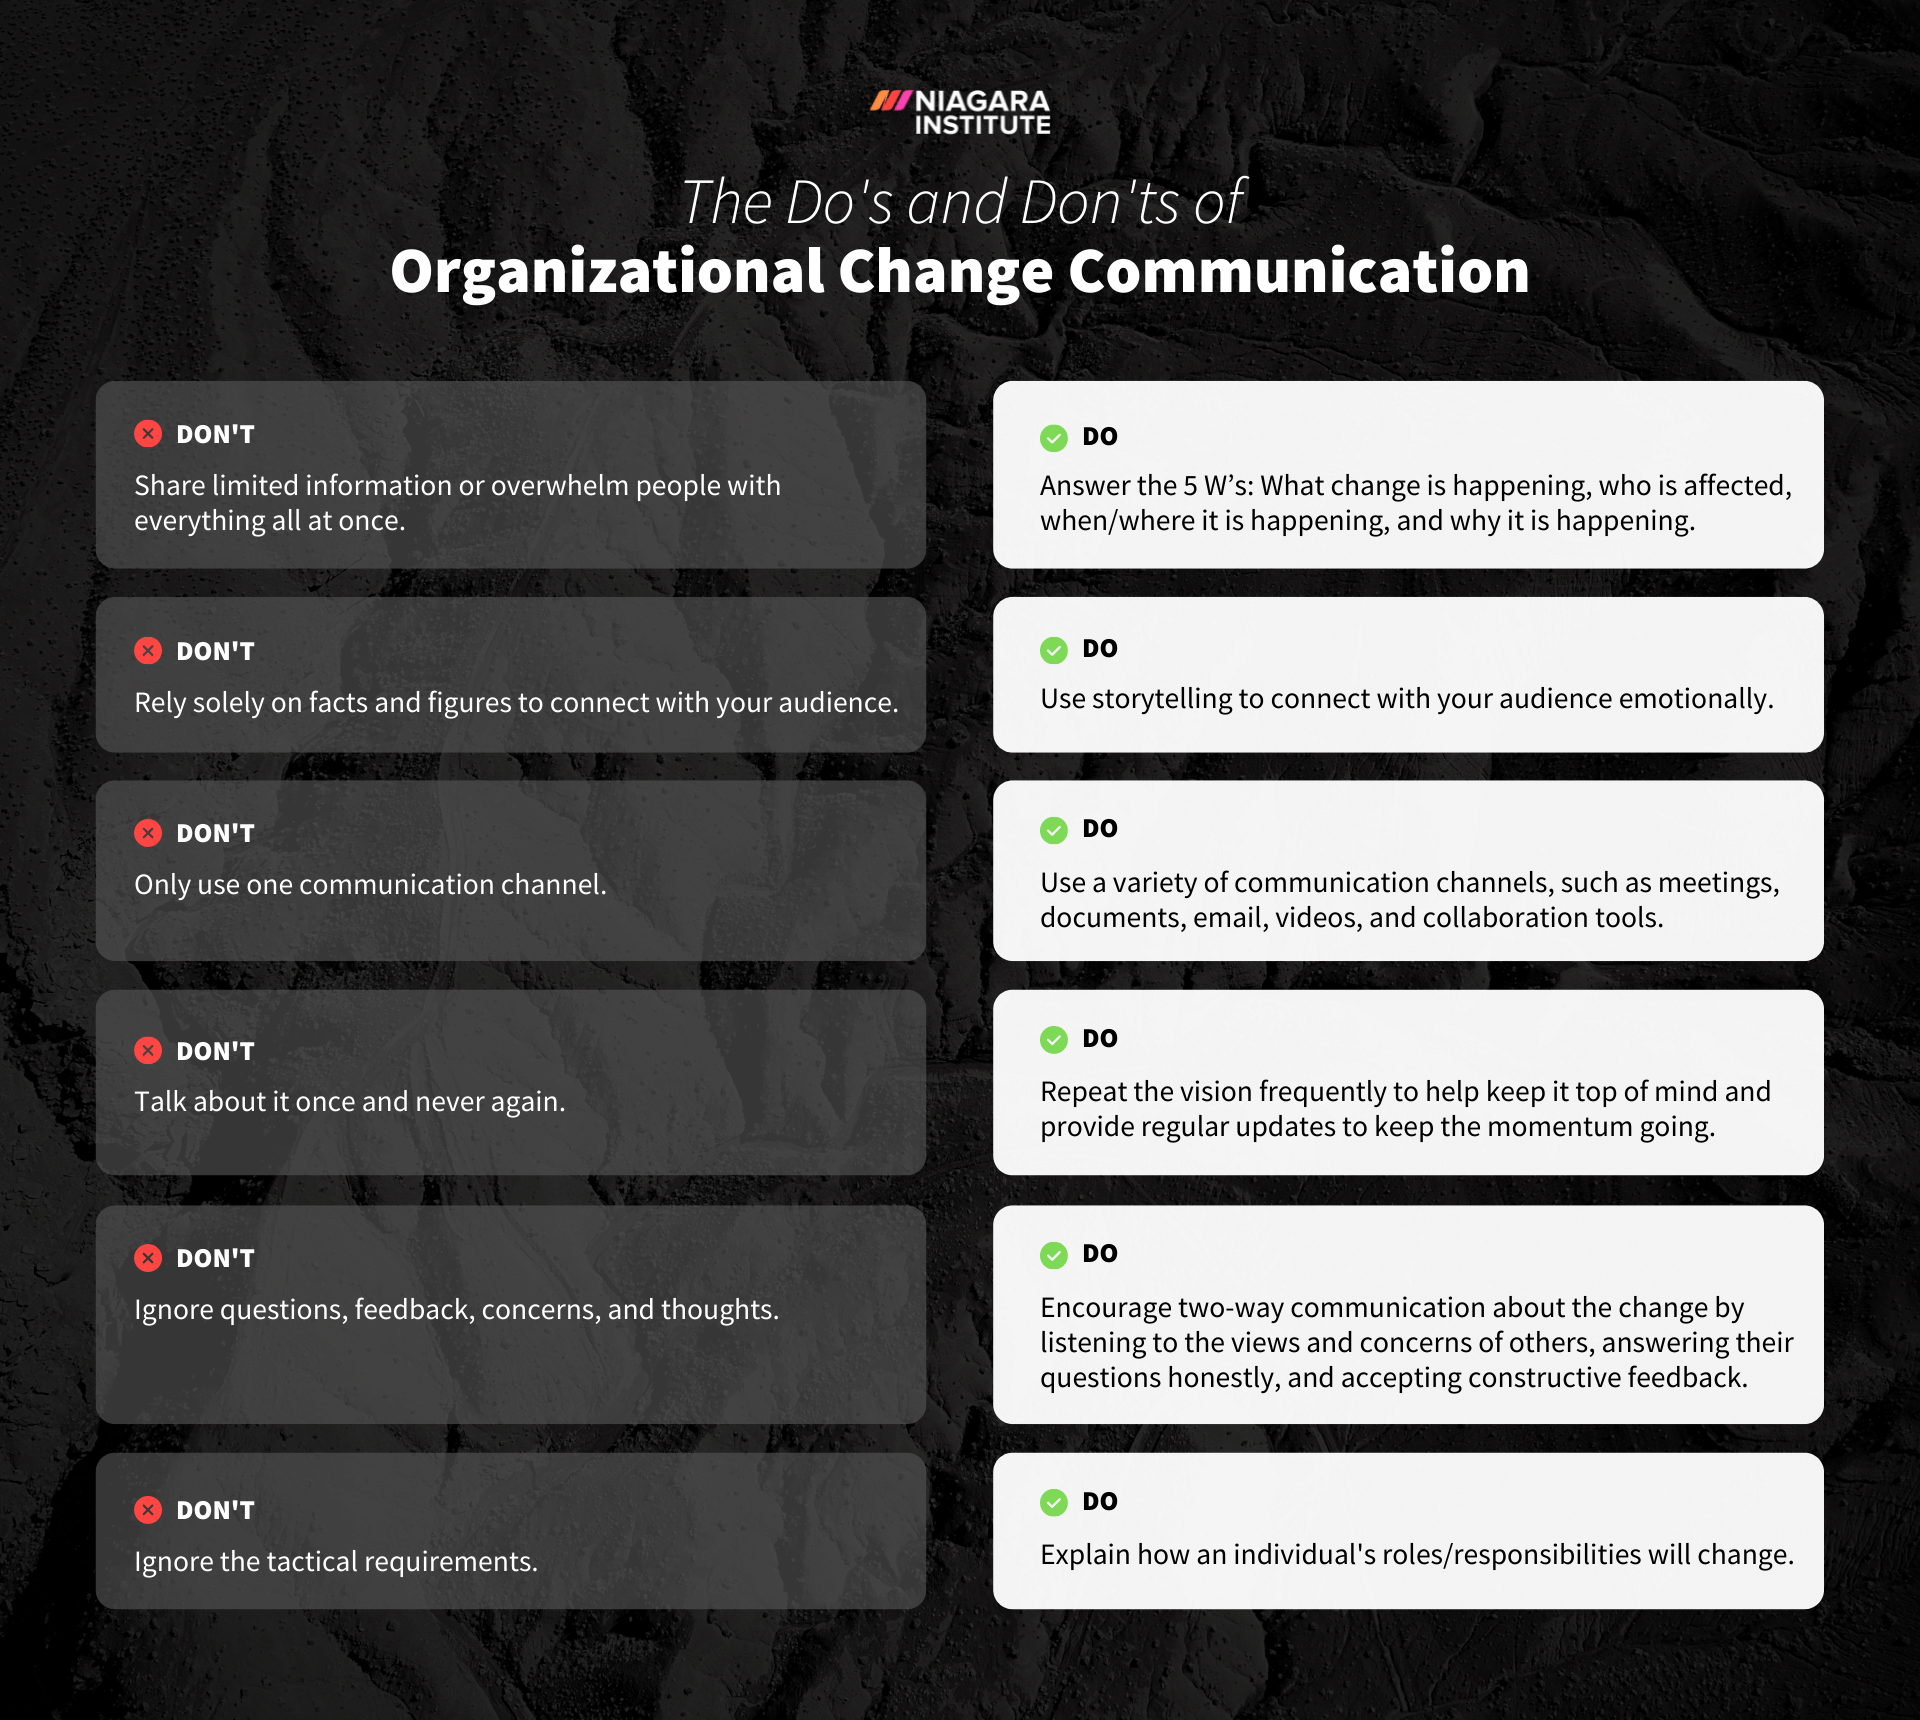 The Dos and Donts of Organizational Change Communication V2